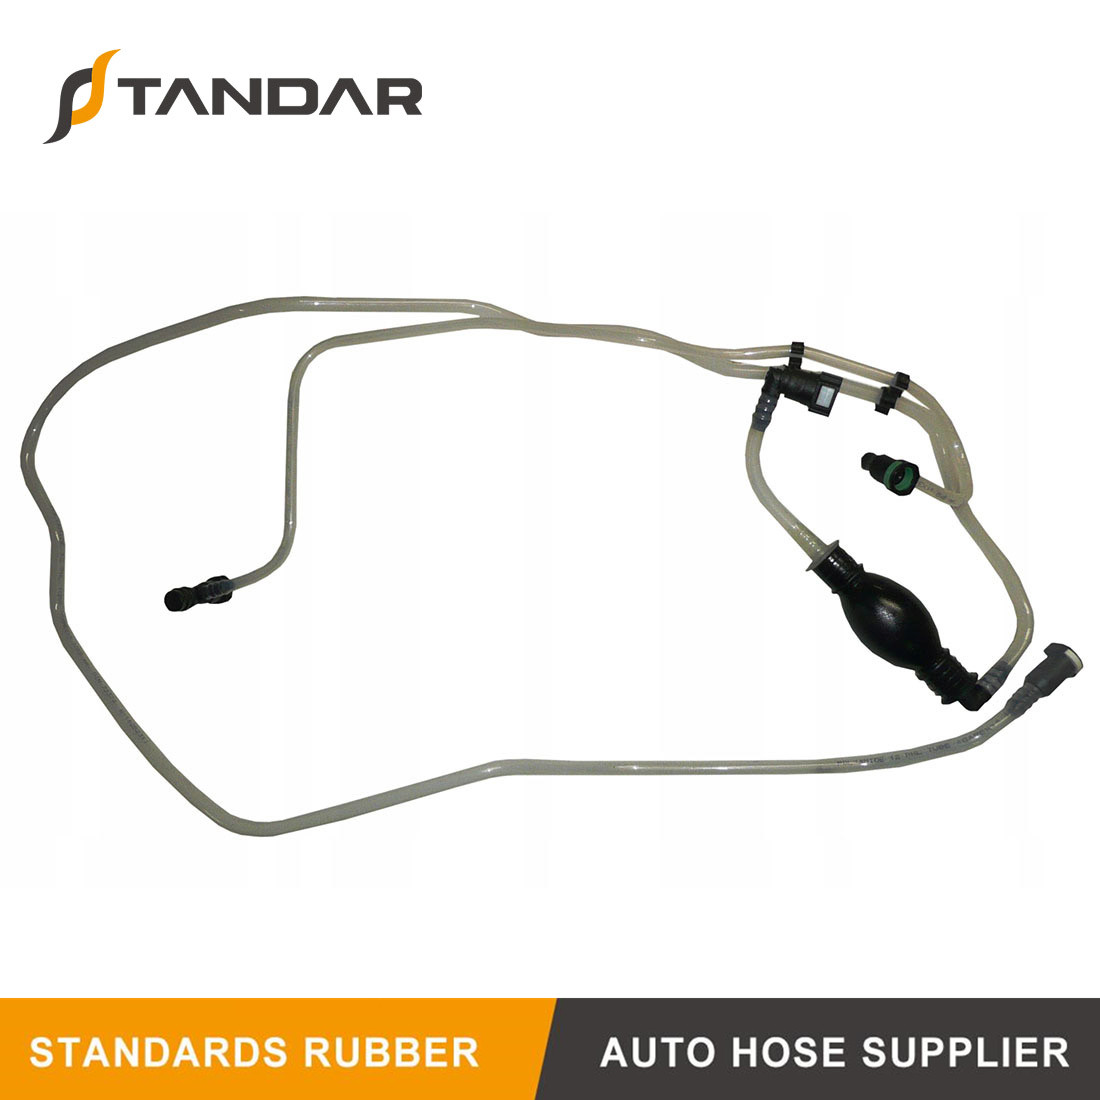 Fuel Hose Pipe With Hand Pump For Renault Kangoo 7700113514 